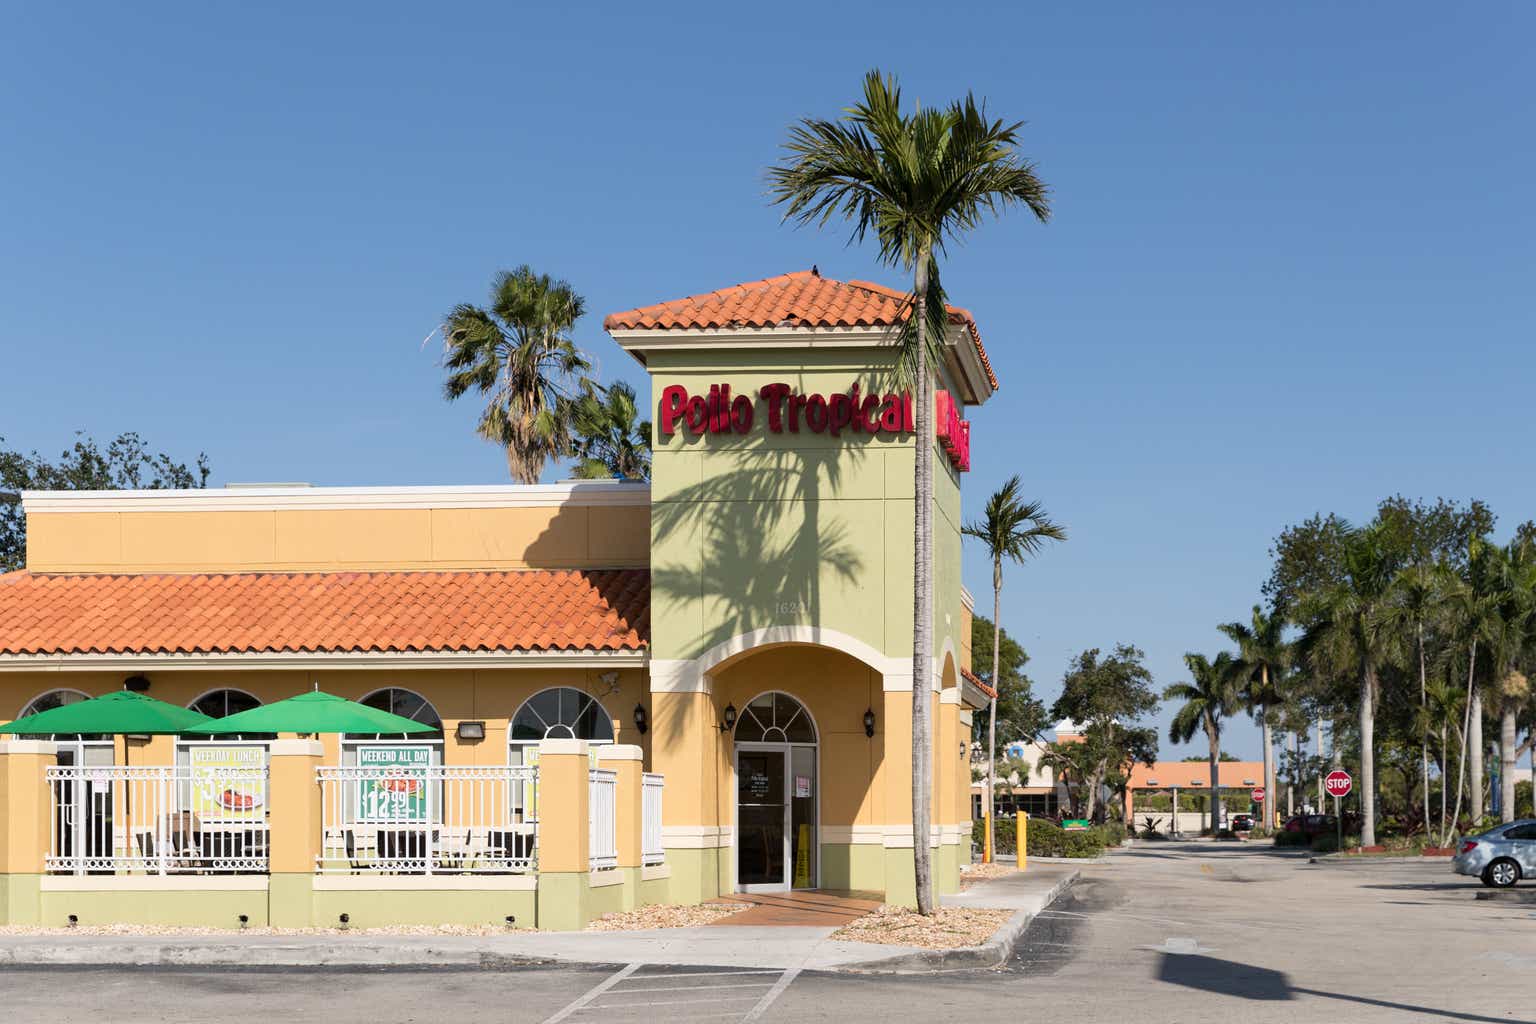 Fiesta Restaurant Continues To Face Strong Headwinds